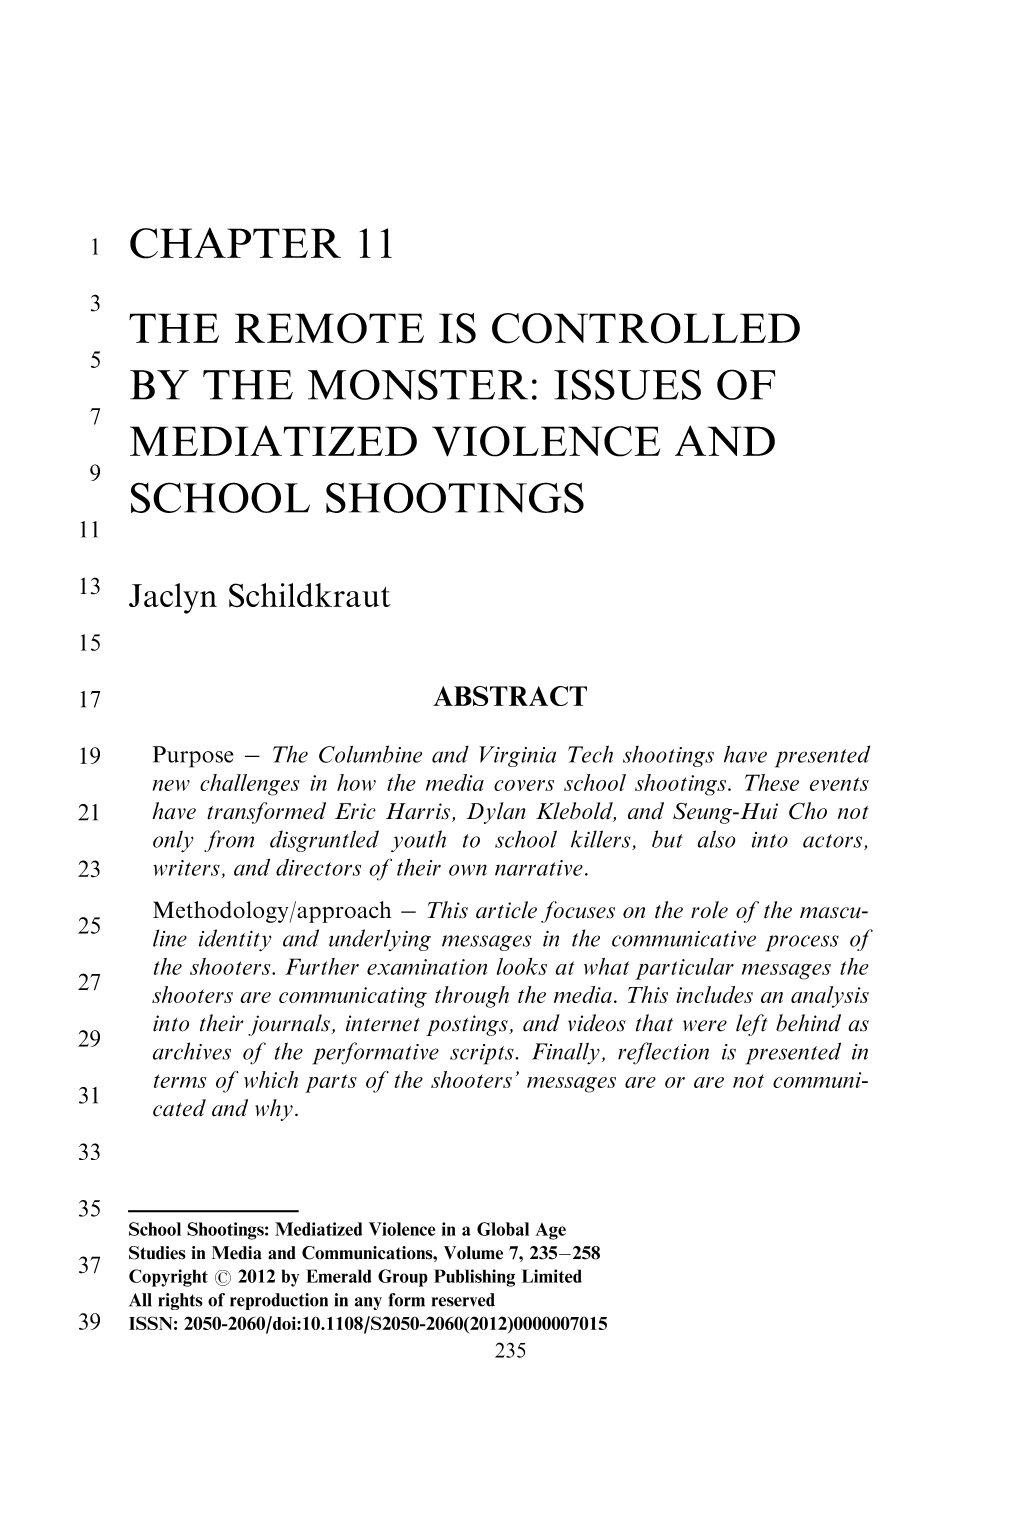 Issues of Mediatized Violence and School Shootings